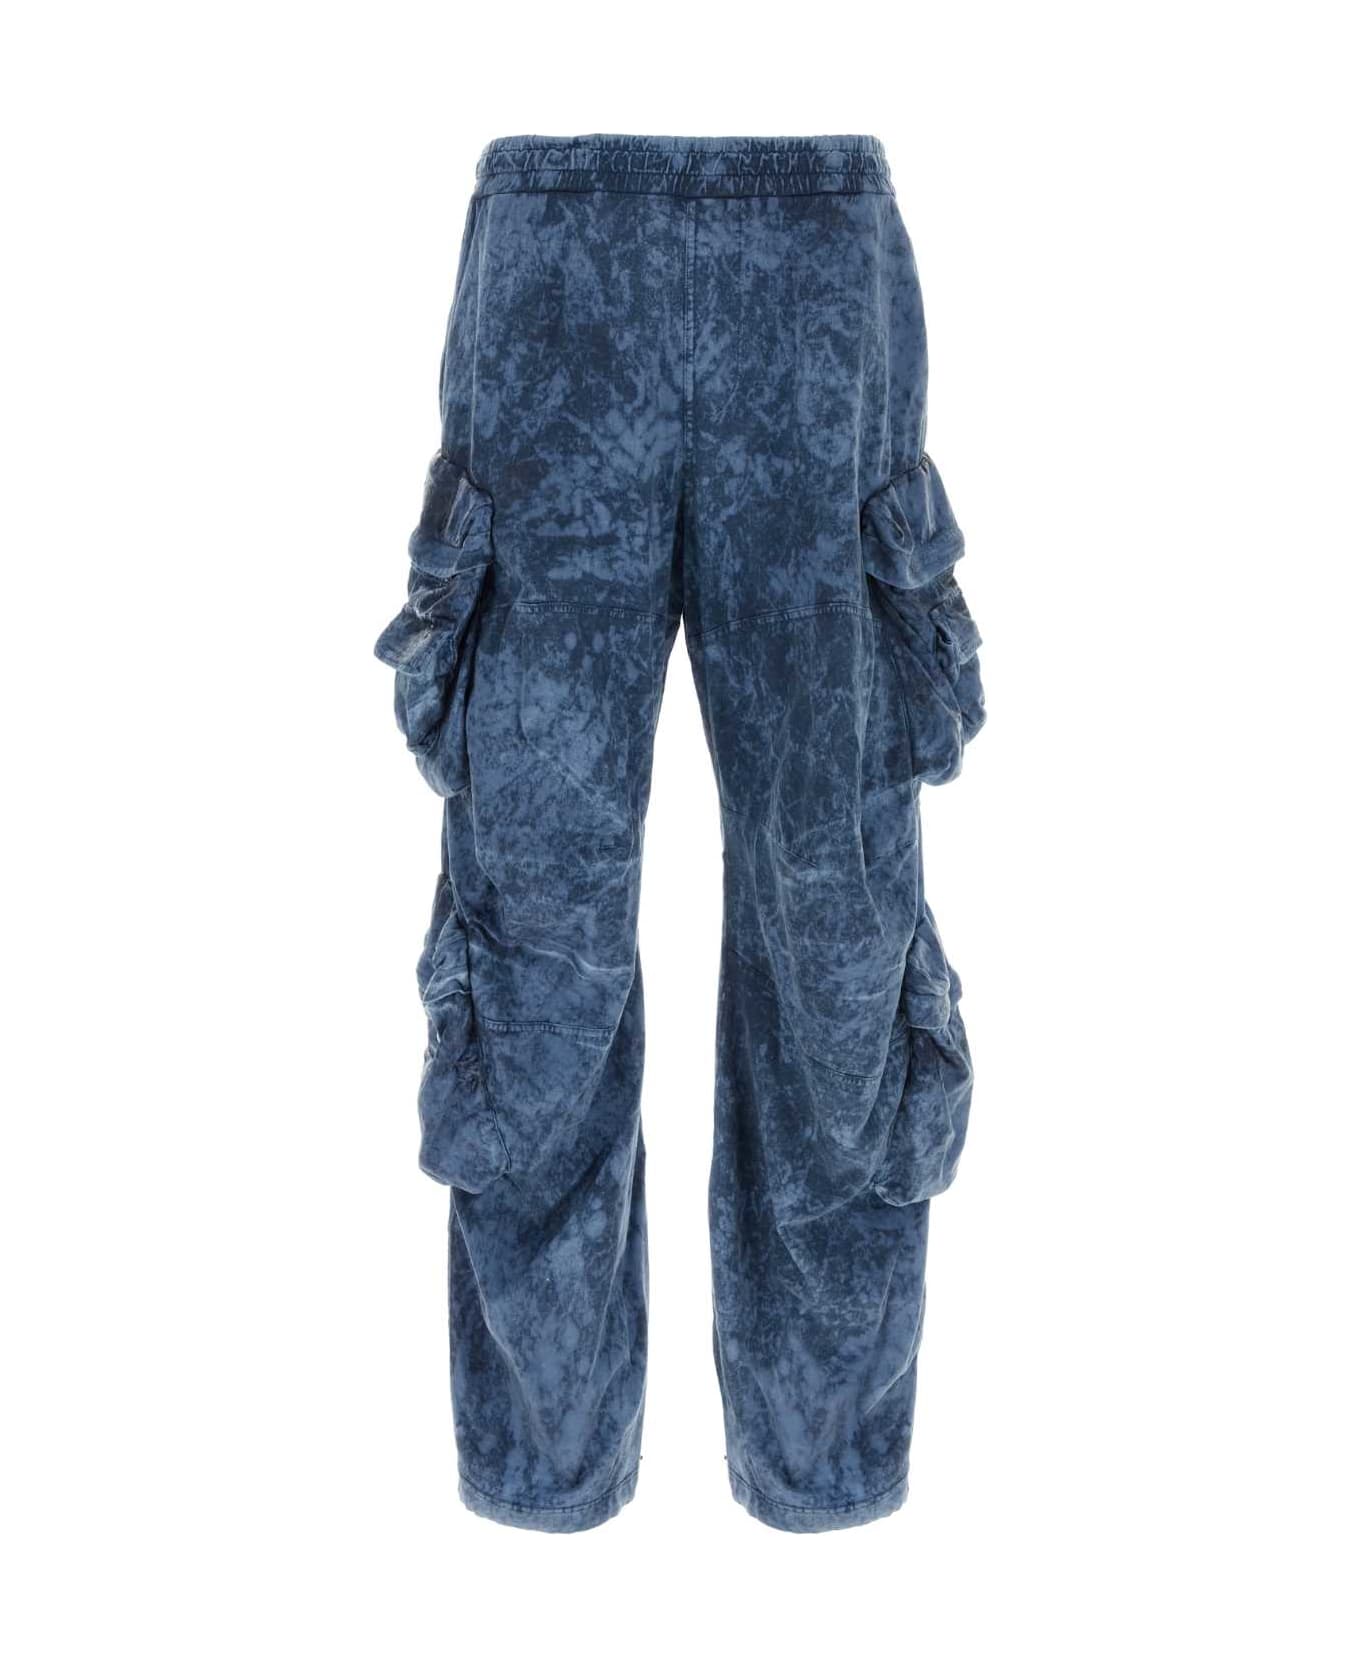 Diesel Printed Cotton Cargo Pant - 8HEA ボトムス